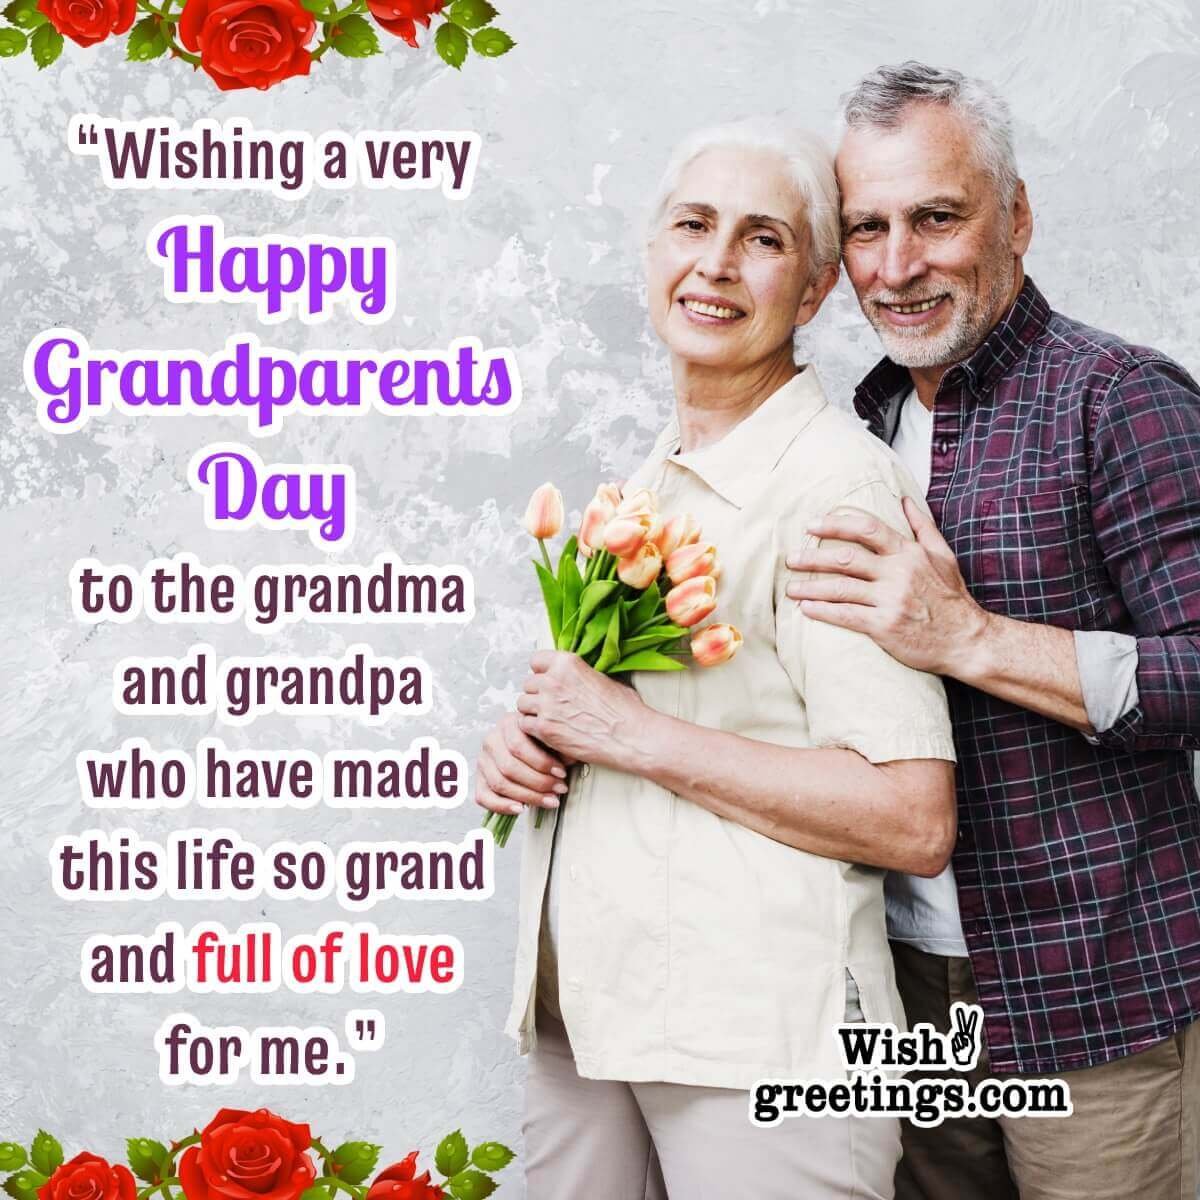 Grandparents day Wishes Messages - Wish Greetings